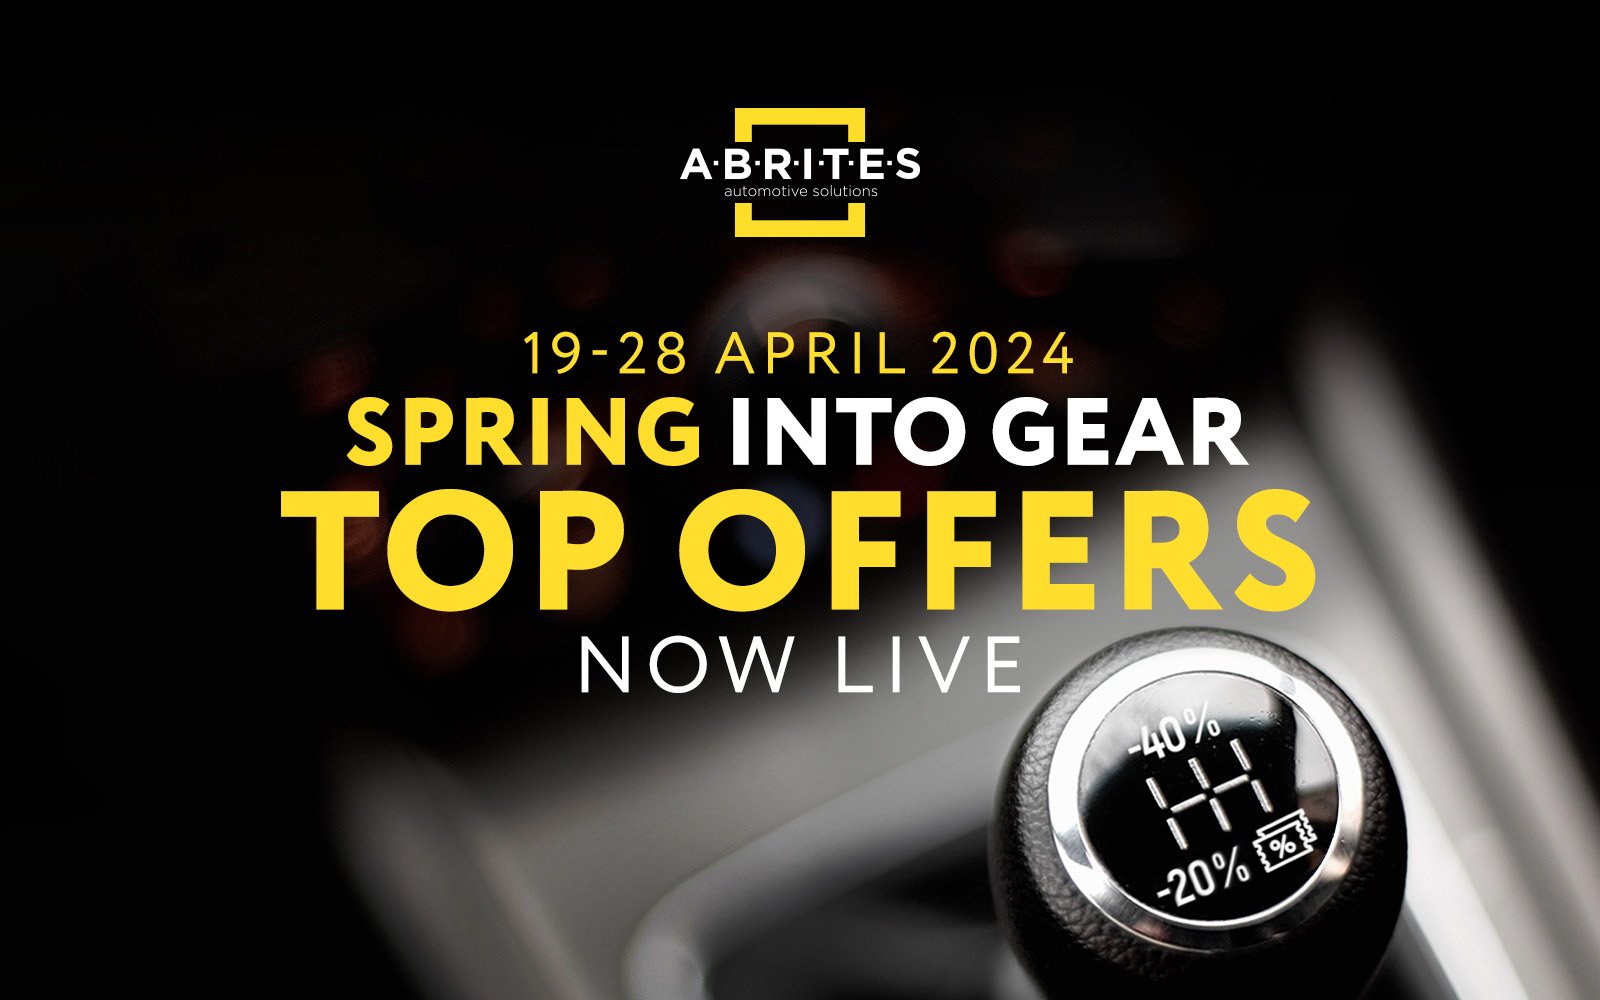 SPRING INTO GEAR WITH HOT SEASONAL OFFERS BY ABRITES NOW!